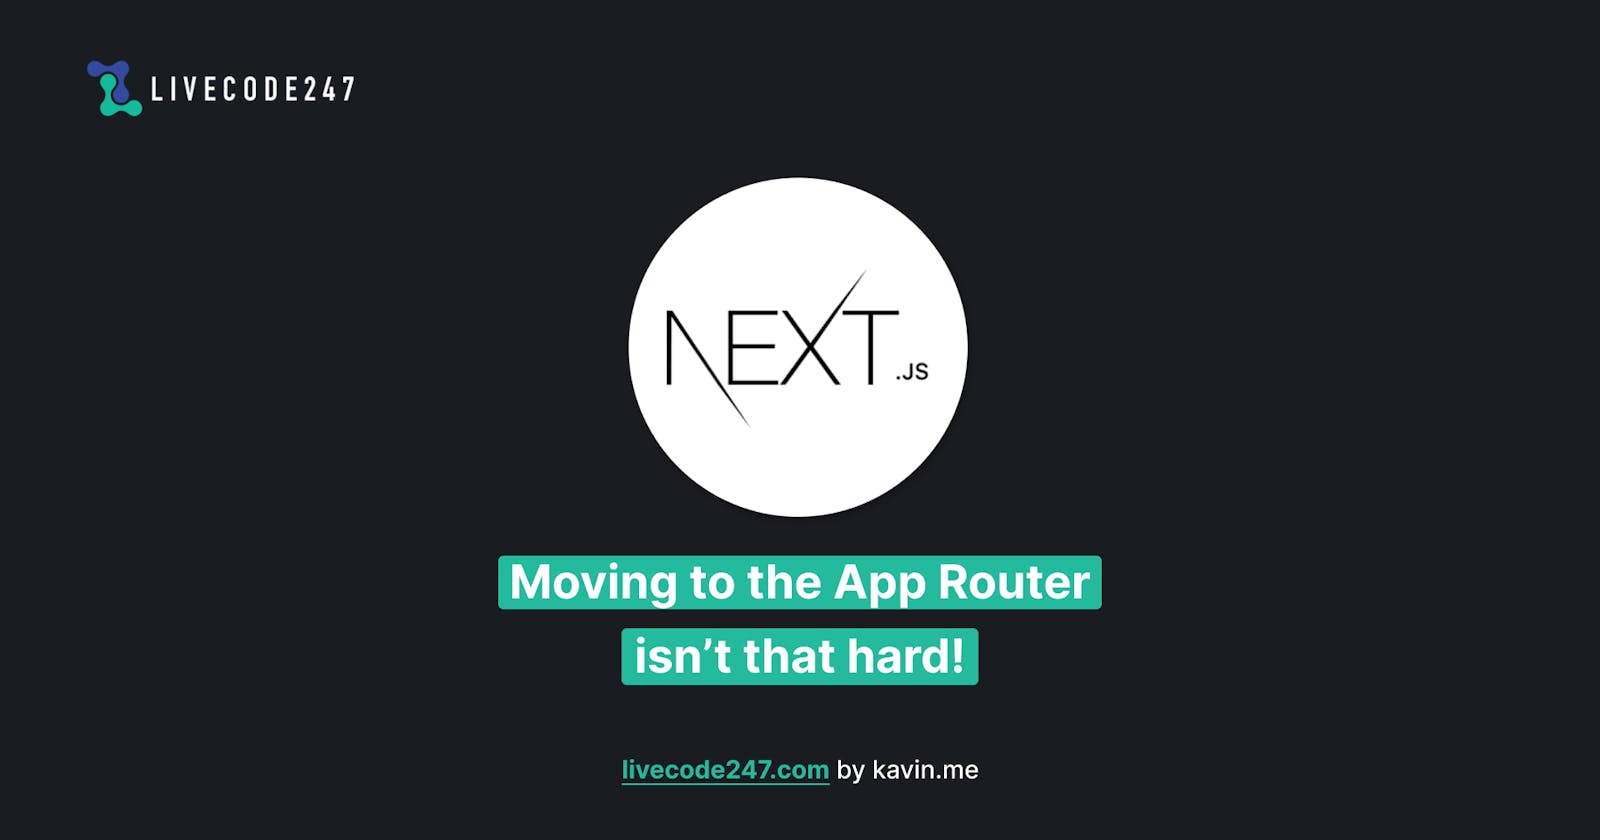 It's so easy to convert a NextJS App to use the App Router!